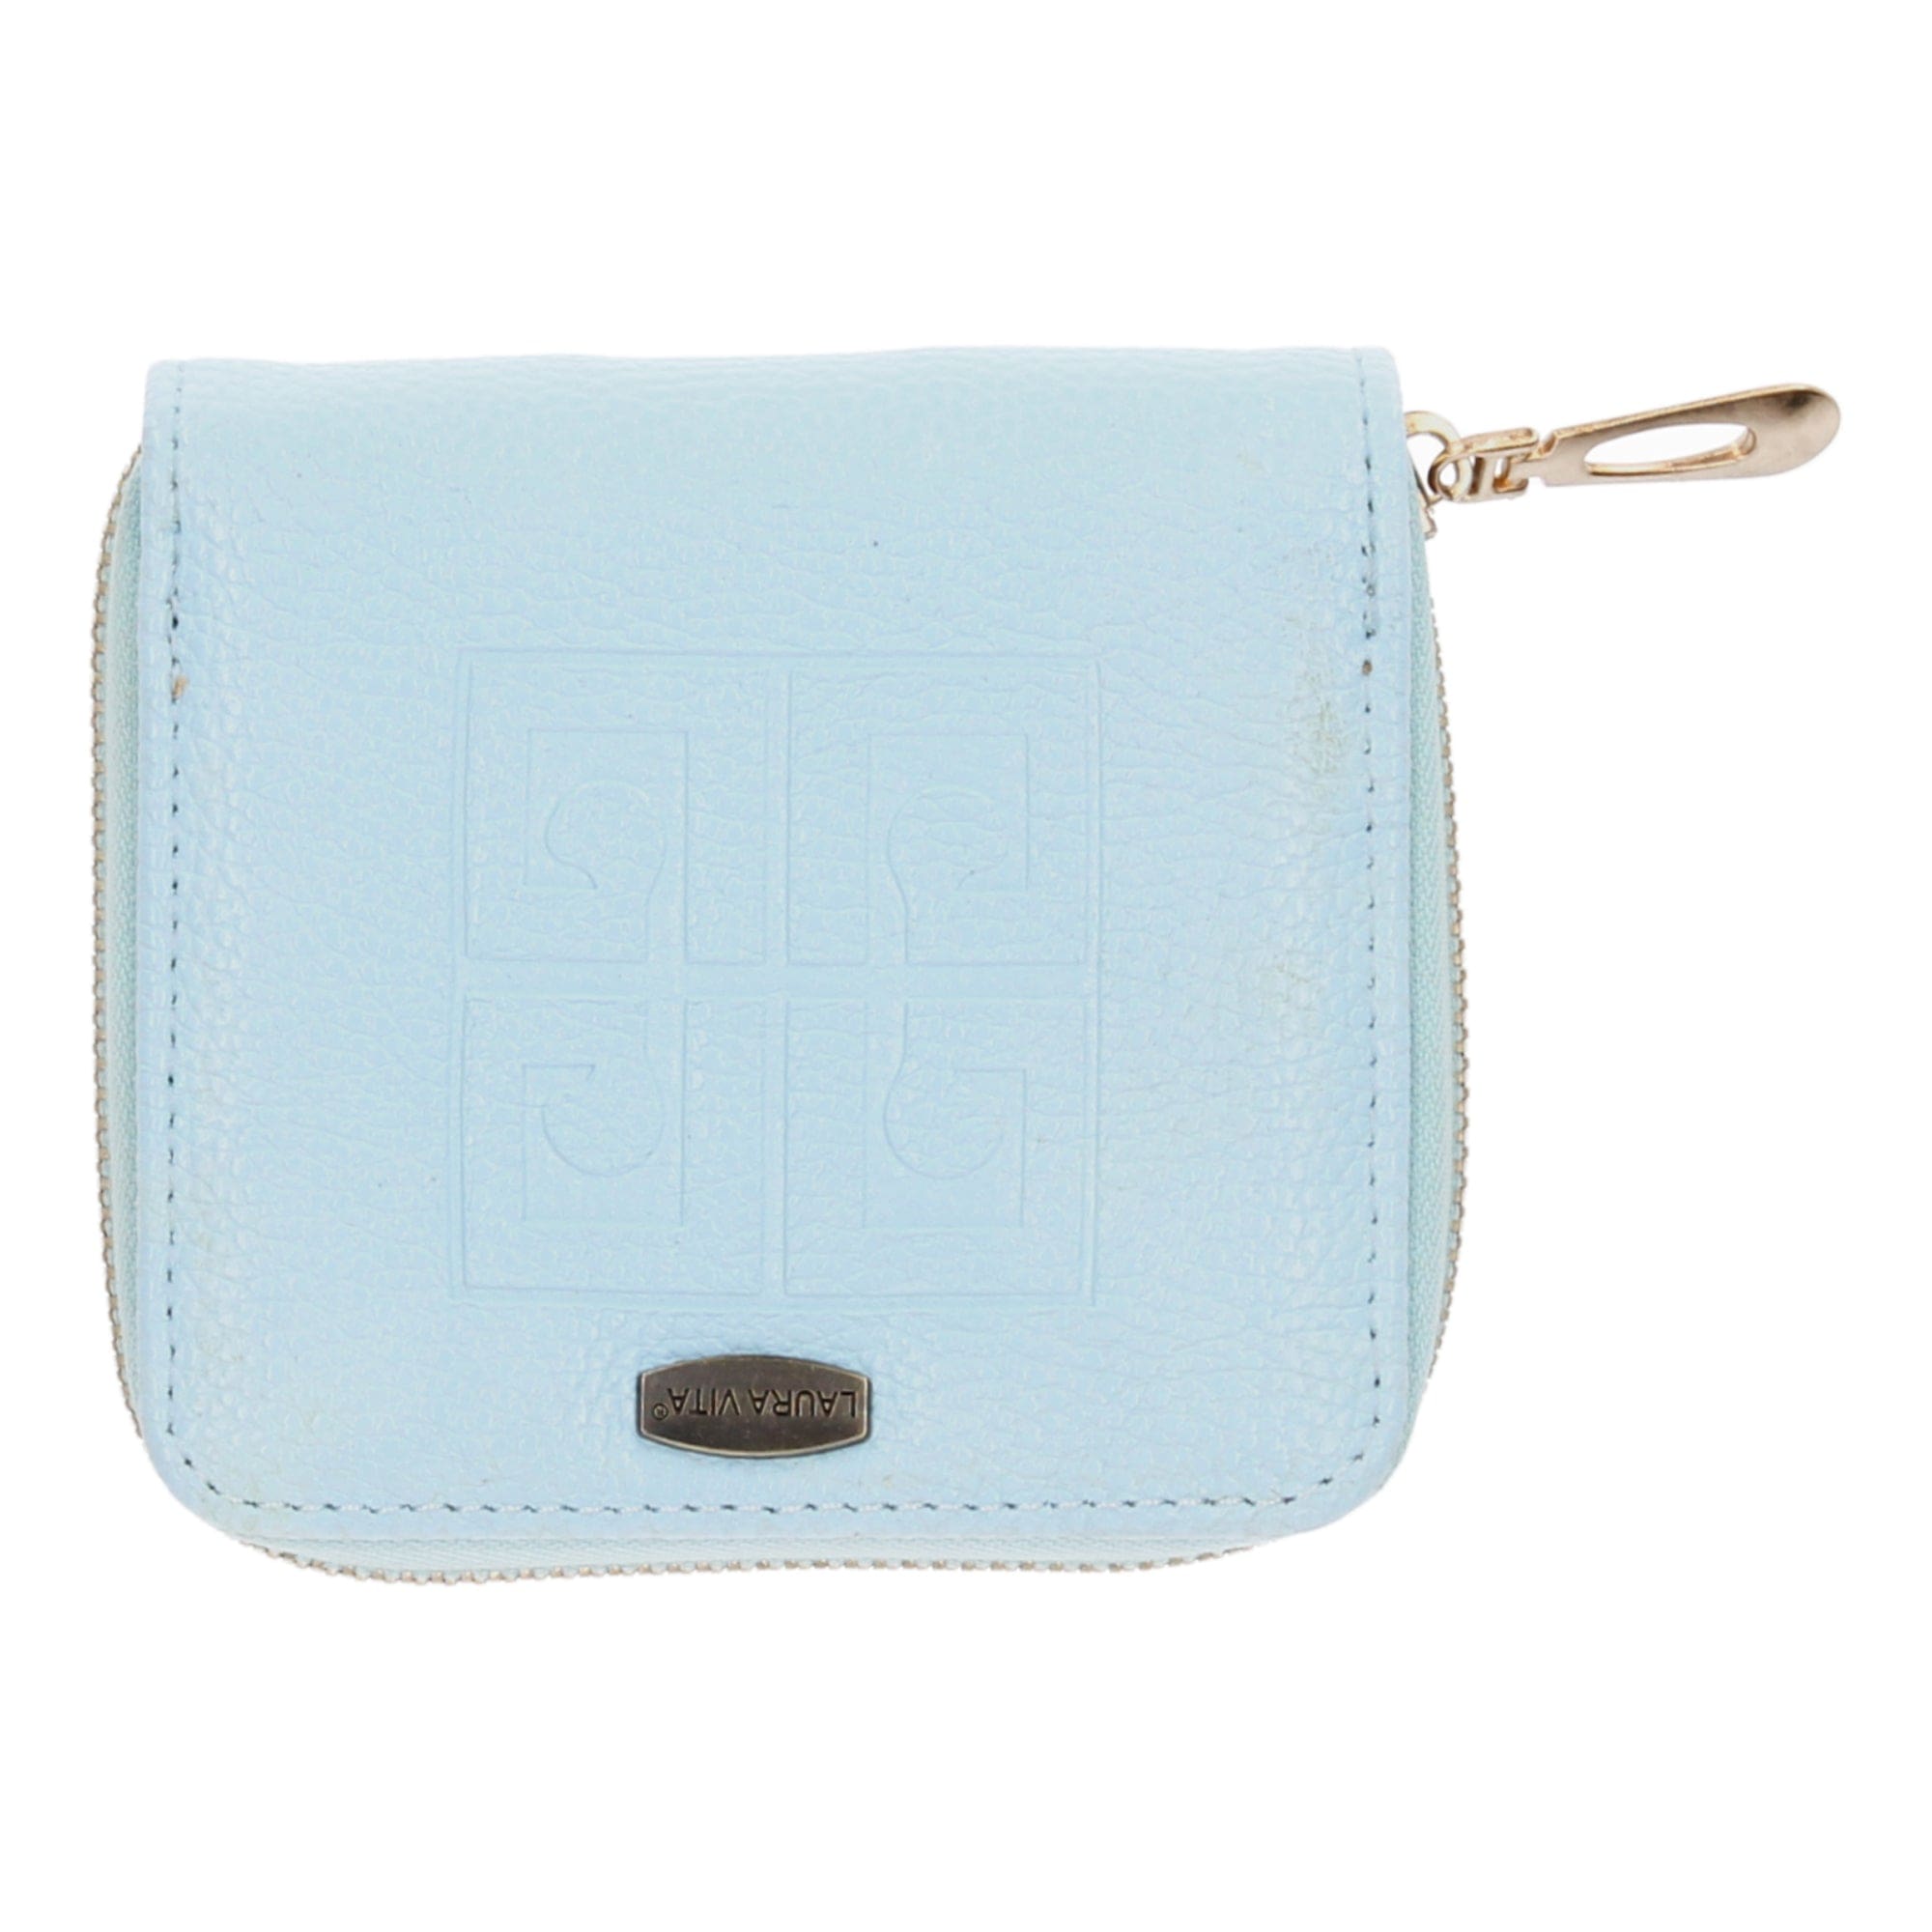 Ordener card case - Turquoise - Small leather goods